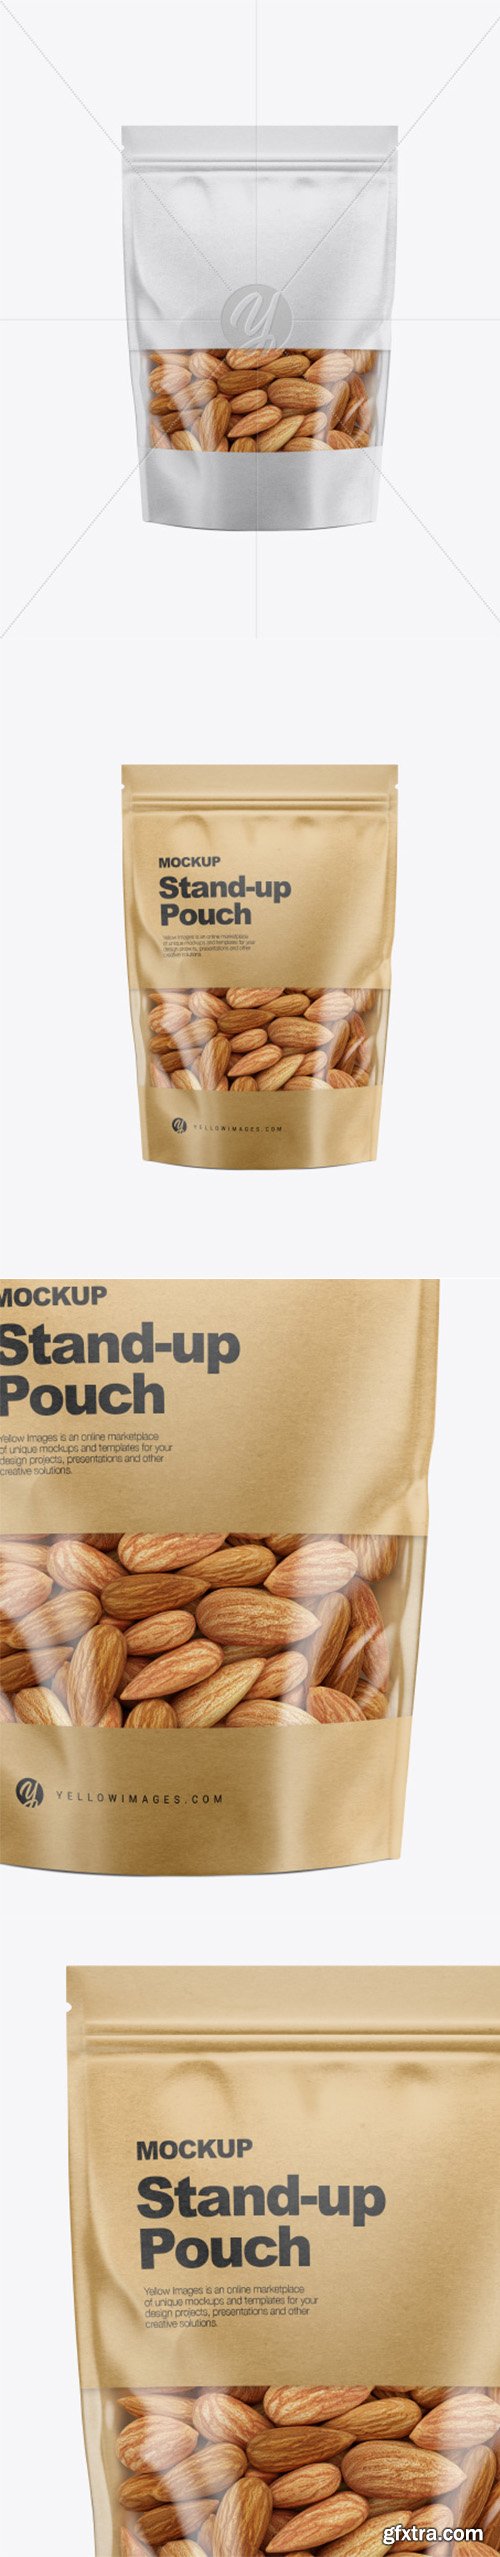 Kraft Stand-Up Pouch Mockup 34801